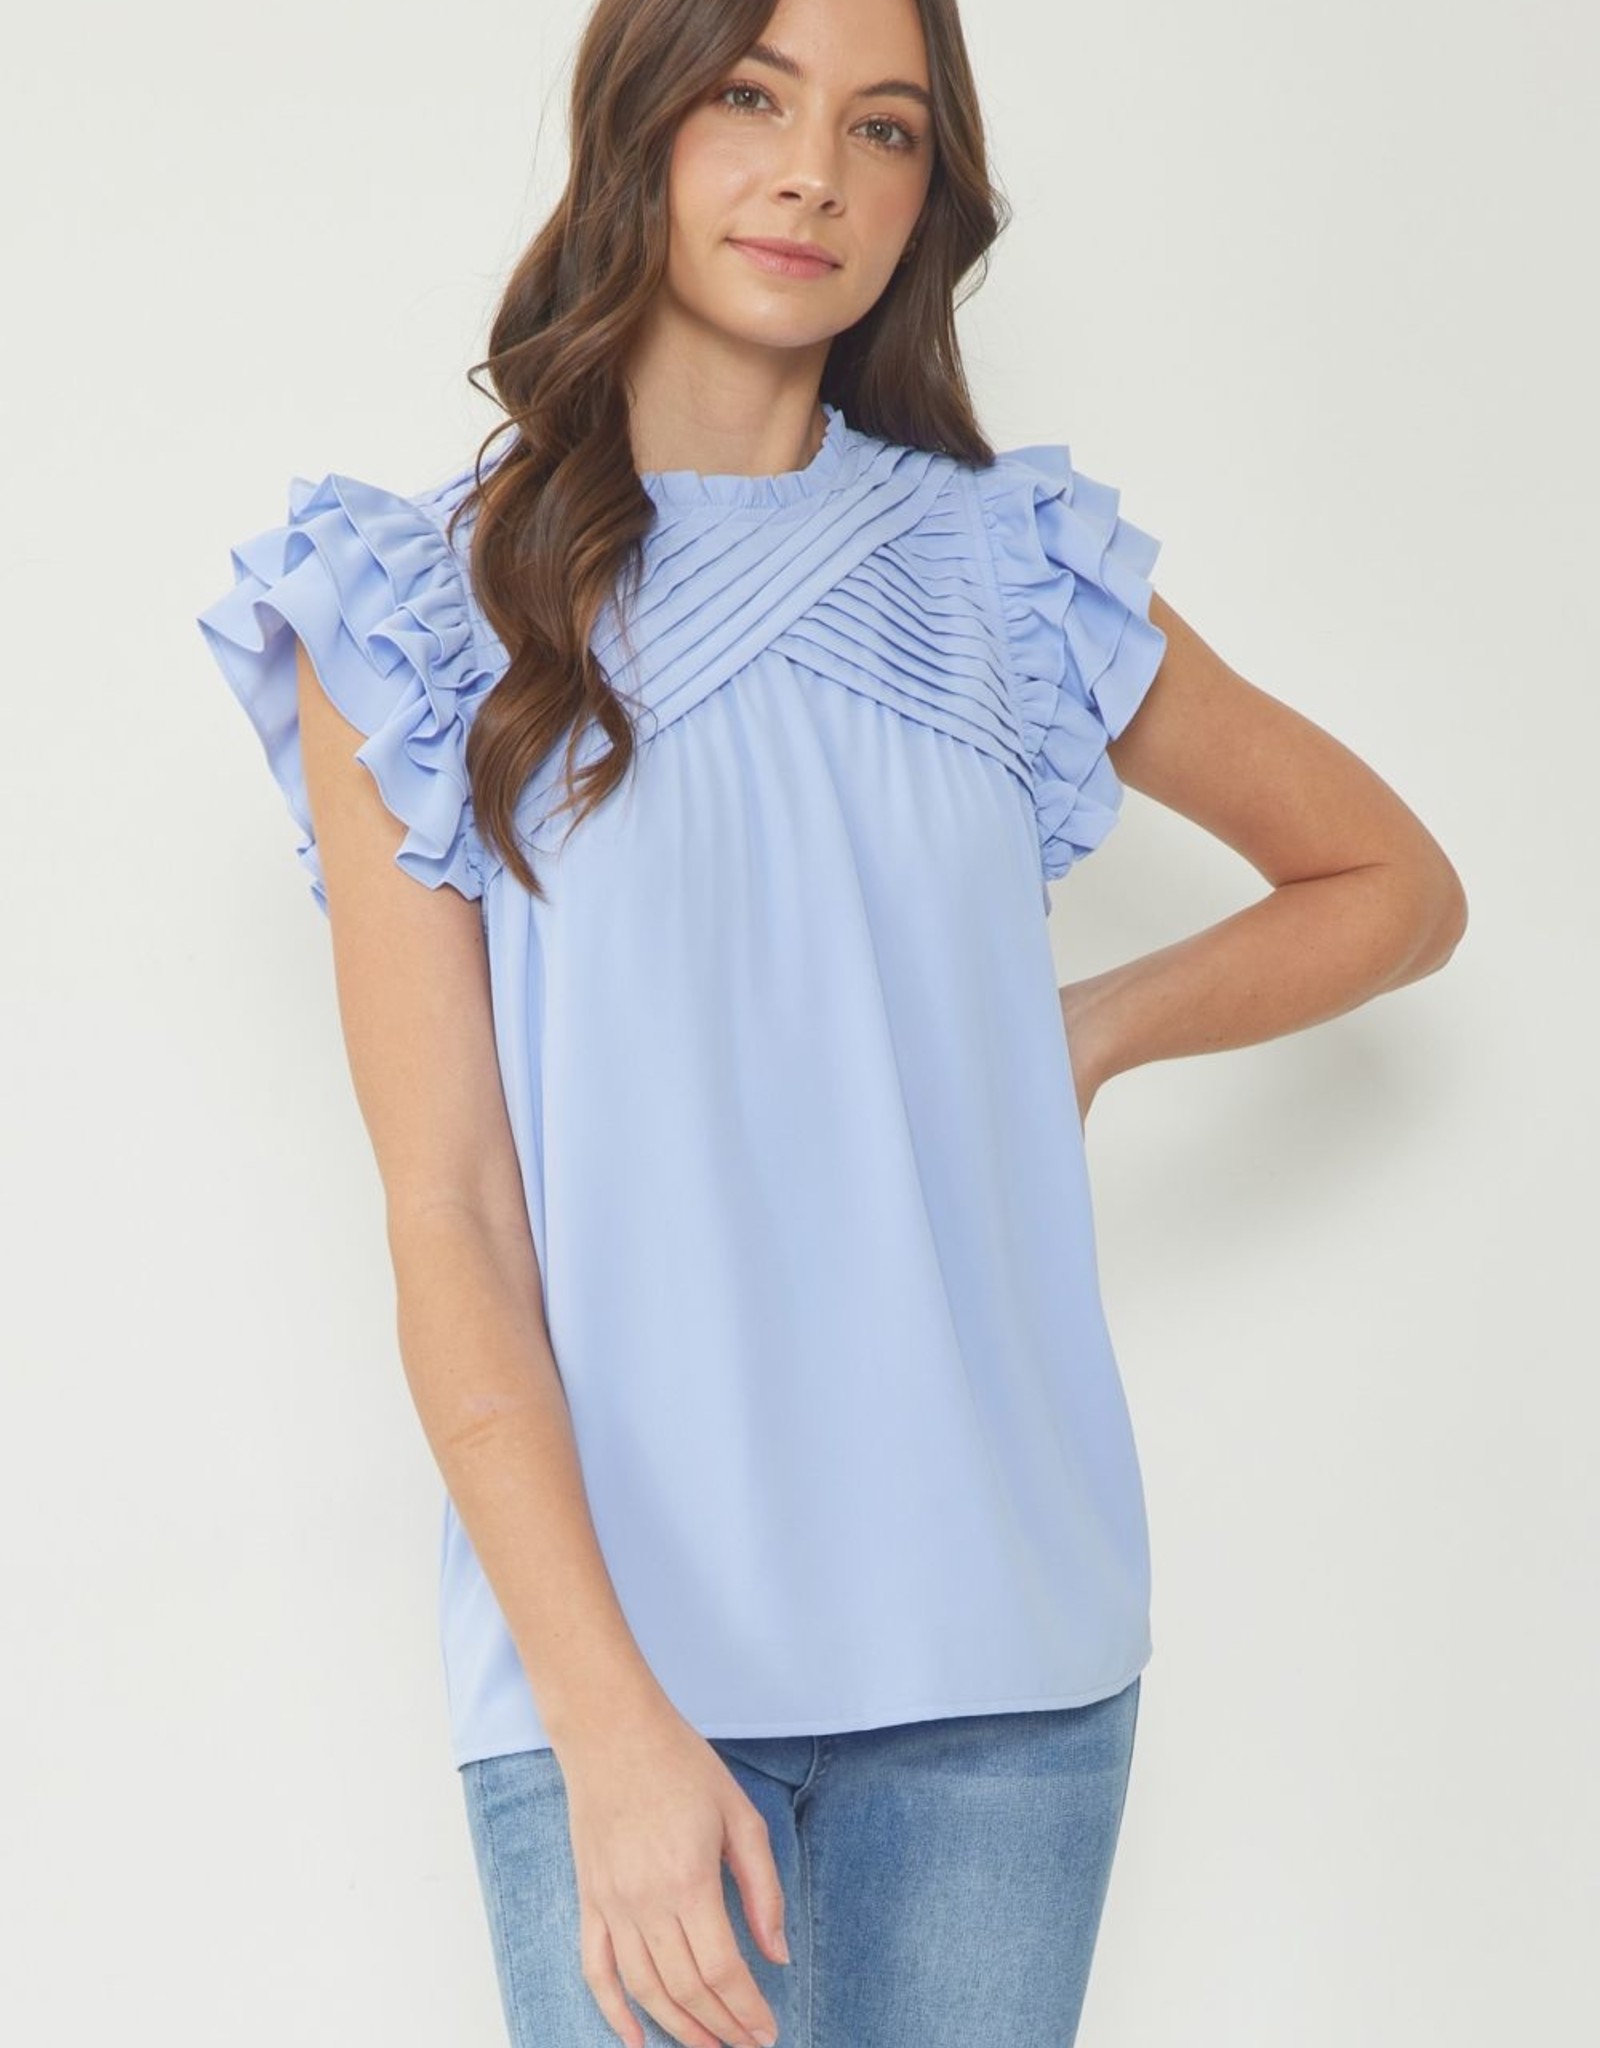 Ruched & Ruffled Top